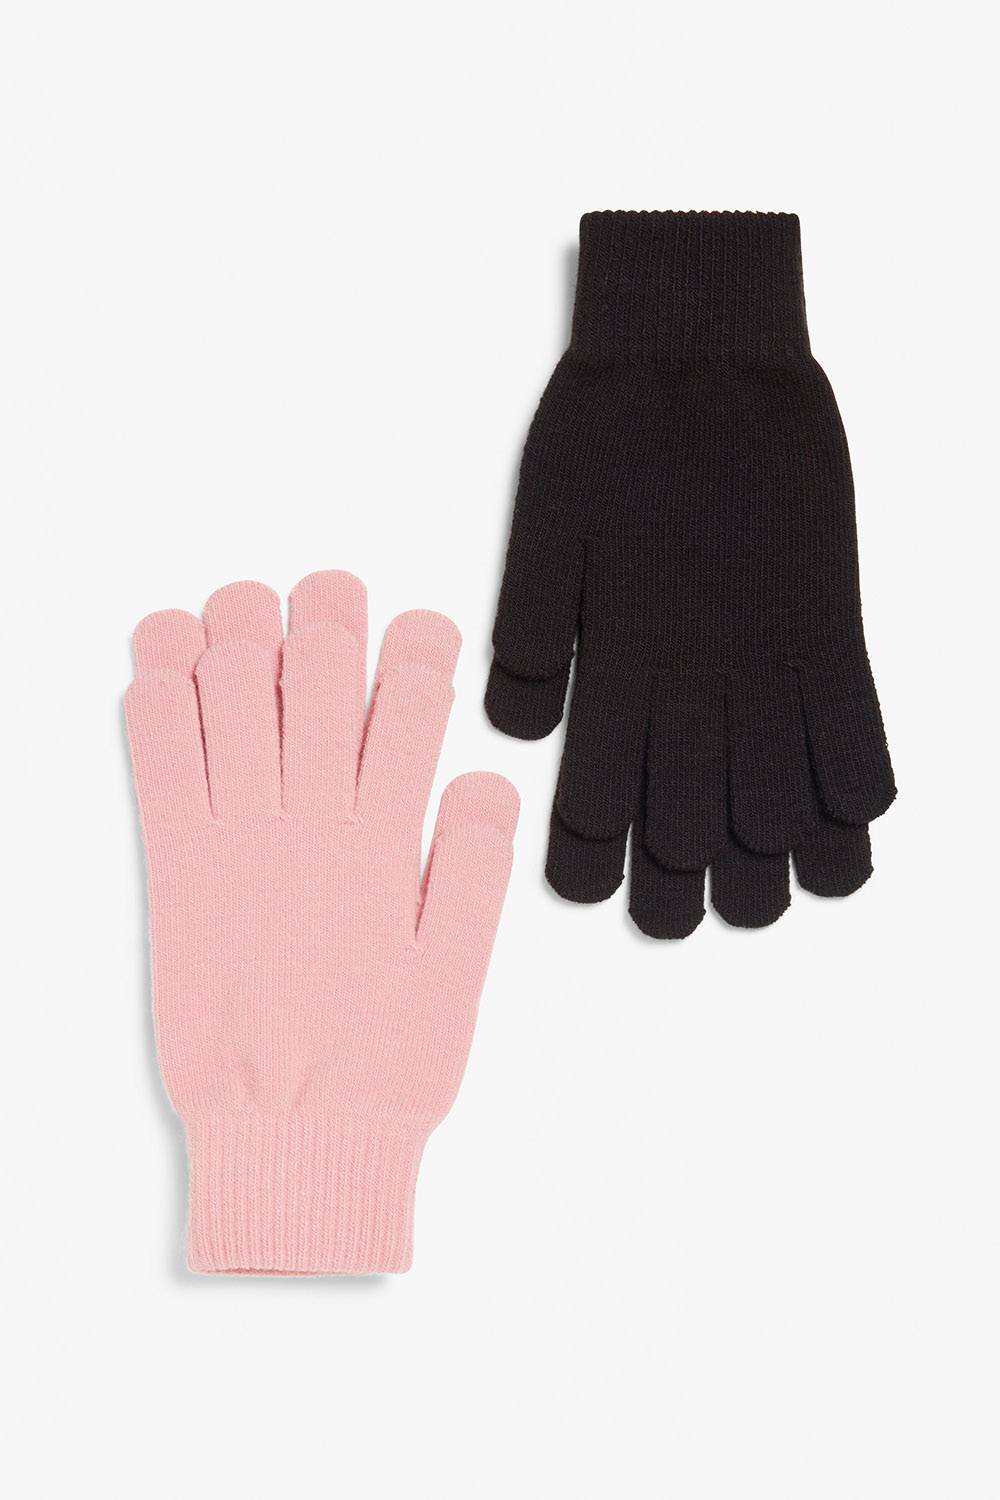 11 Best Affordable Vegan Gloves You Need This Winter | Panaprium